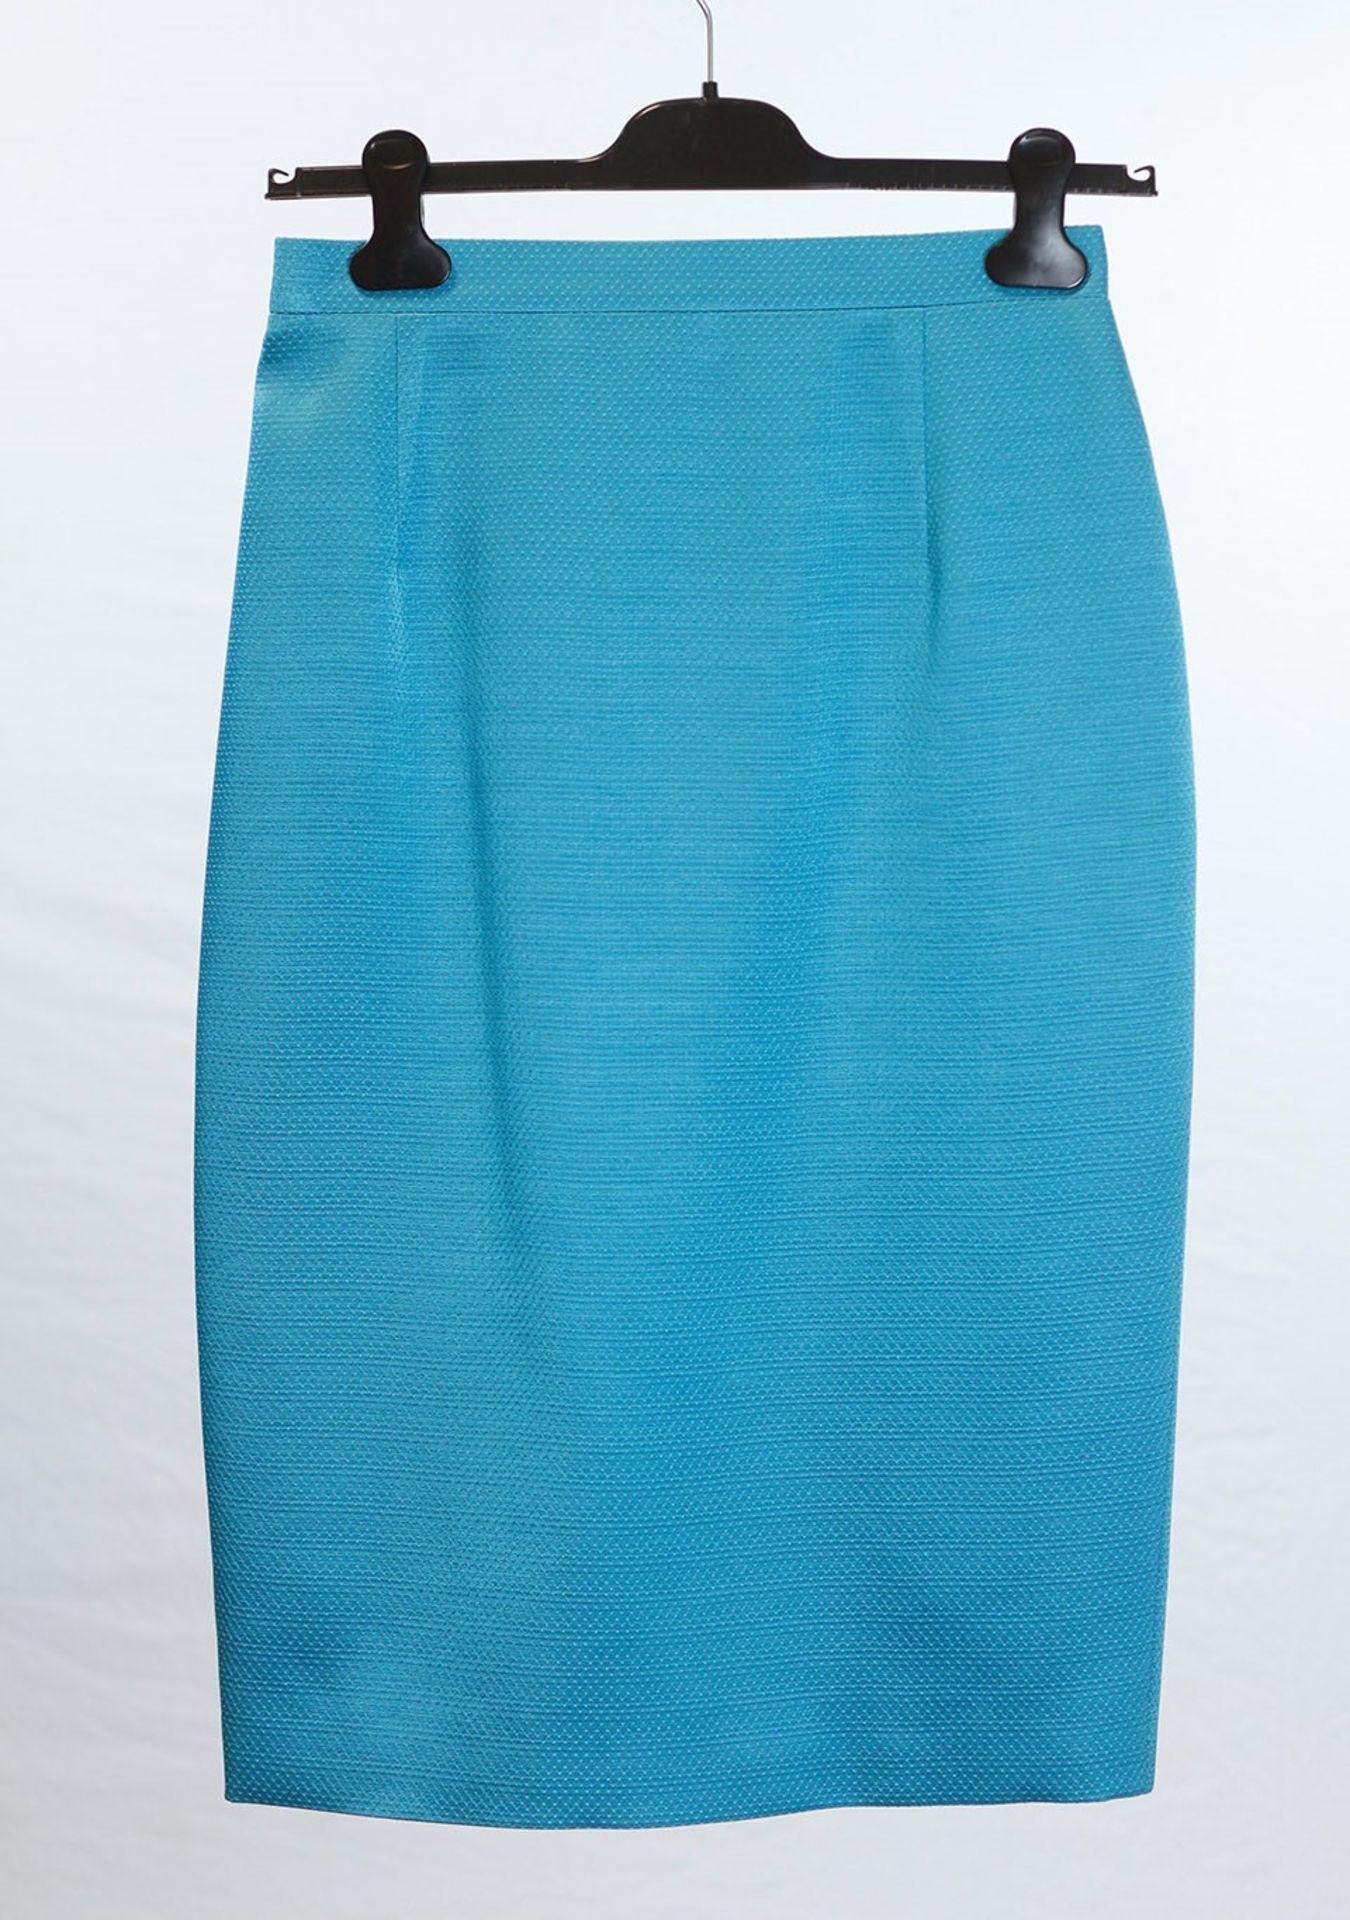 1 x Boutique Le Duc Blue Skirt Suit - Size: 12 - Material: 100% Cotton - From a High End Clothing - Image 7 of 14